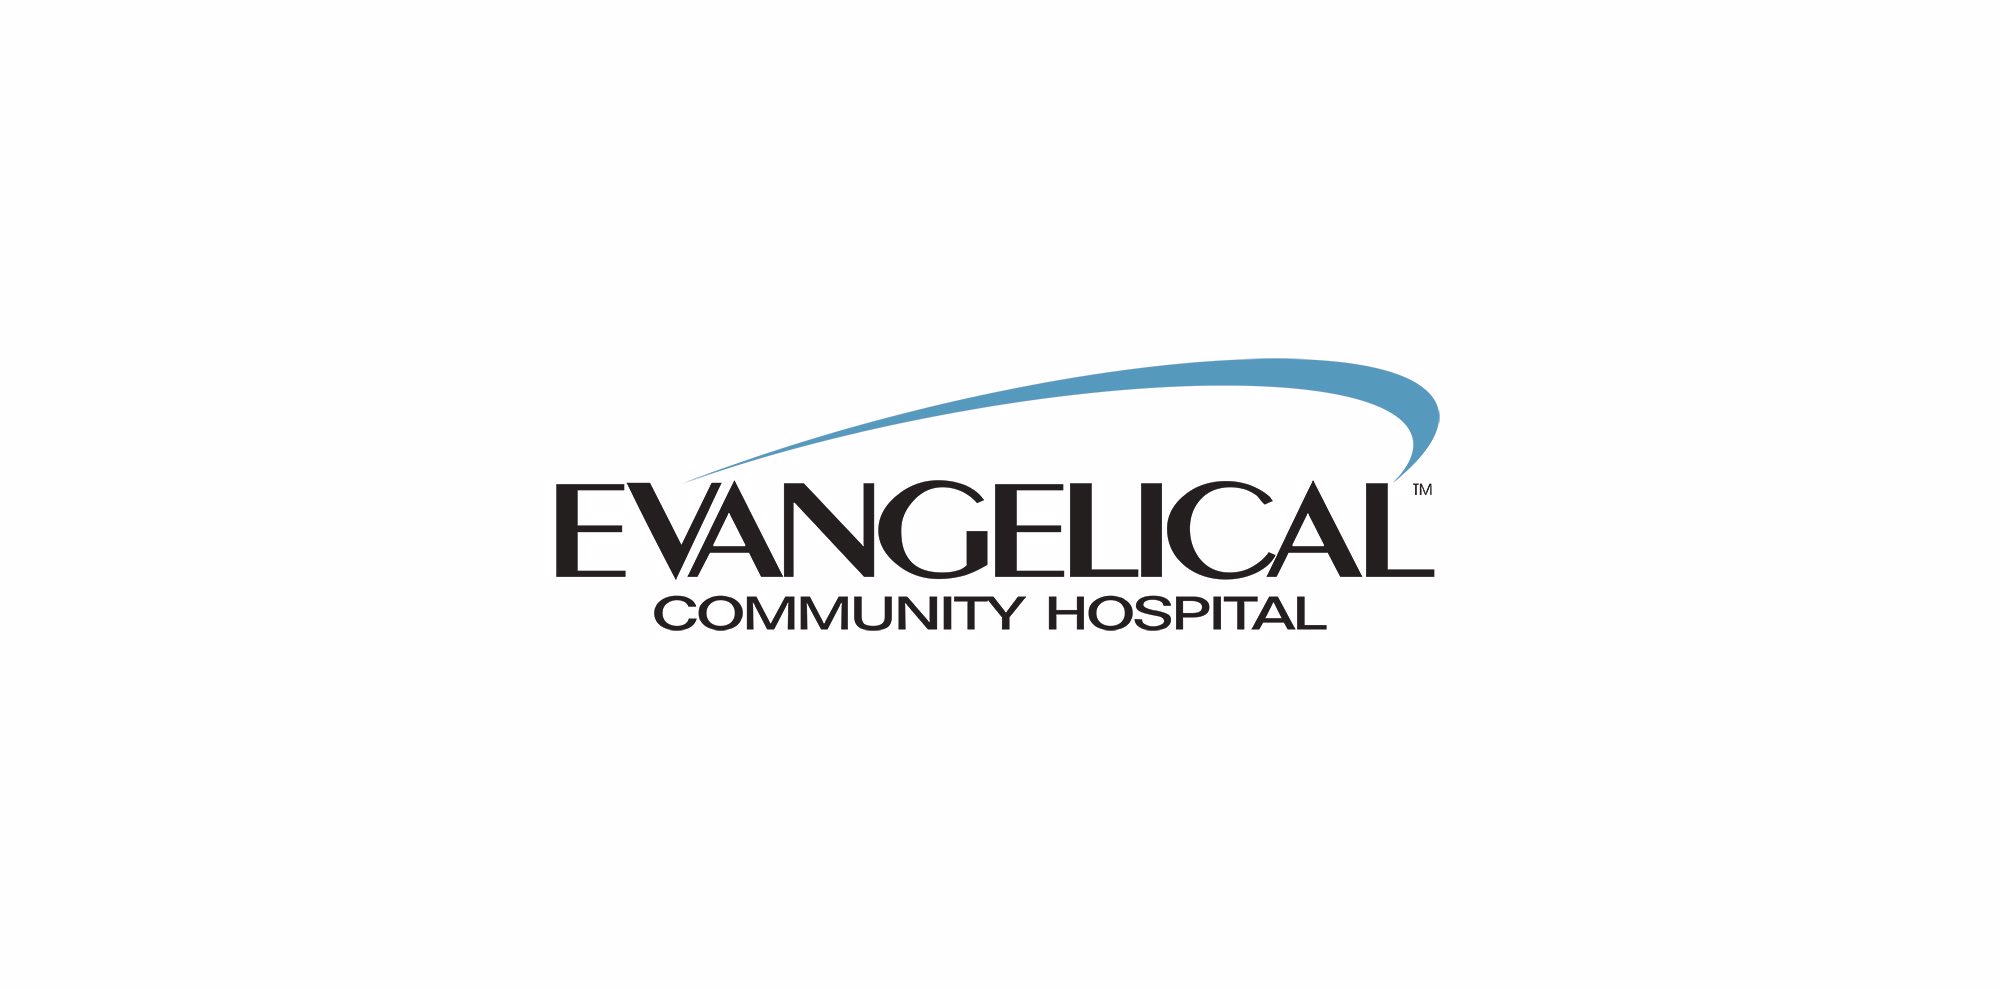 Evangelical Community Hospital and the YMCA Celebrate Healthy Kids at Children’s Health Fair